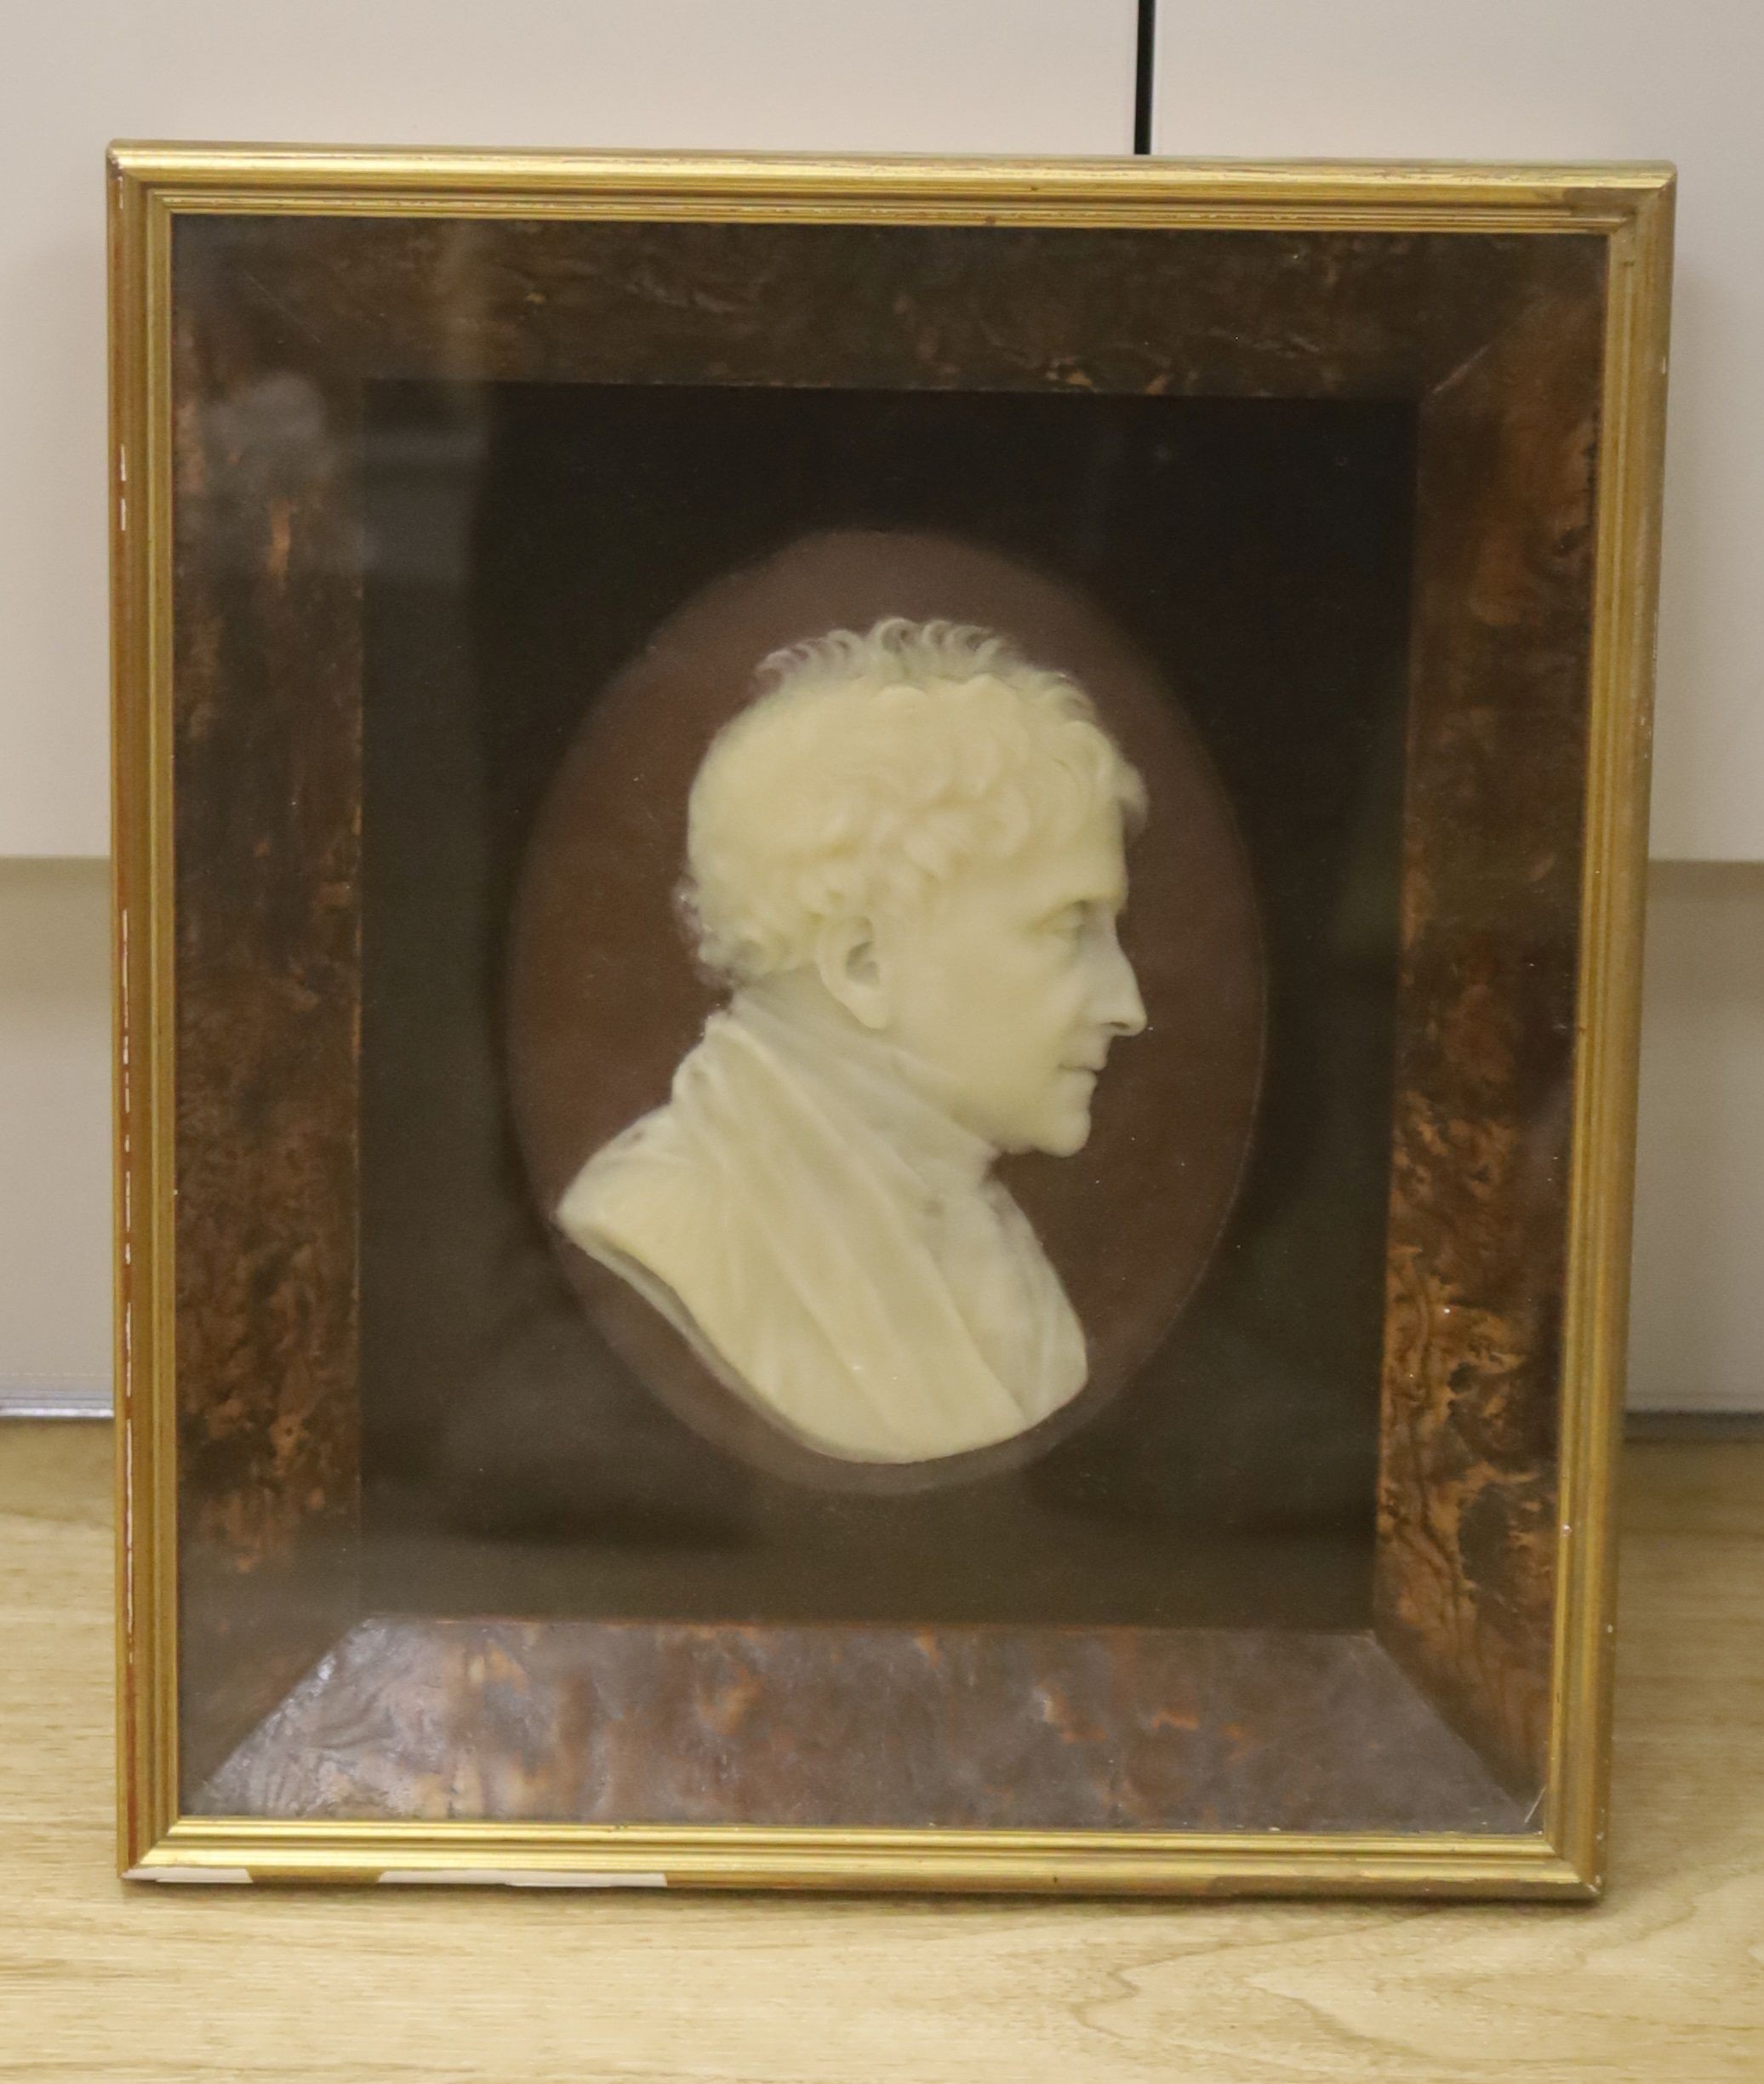 Richard Cockle Lucas, The Very Rev. Thomas Garnier, Dean of Winchester, 1852, in profile to Dexter, signed, inscribed and dated, a wax profile portrait, overall 31 x 27cm